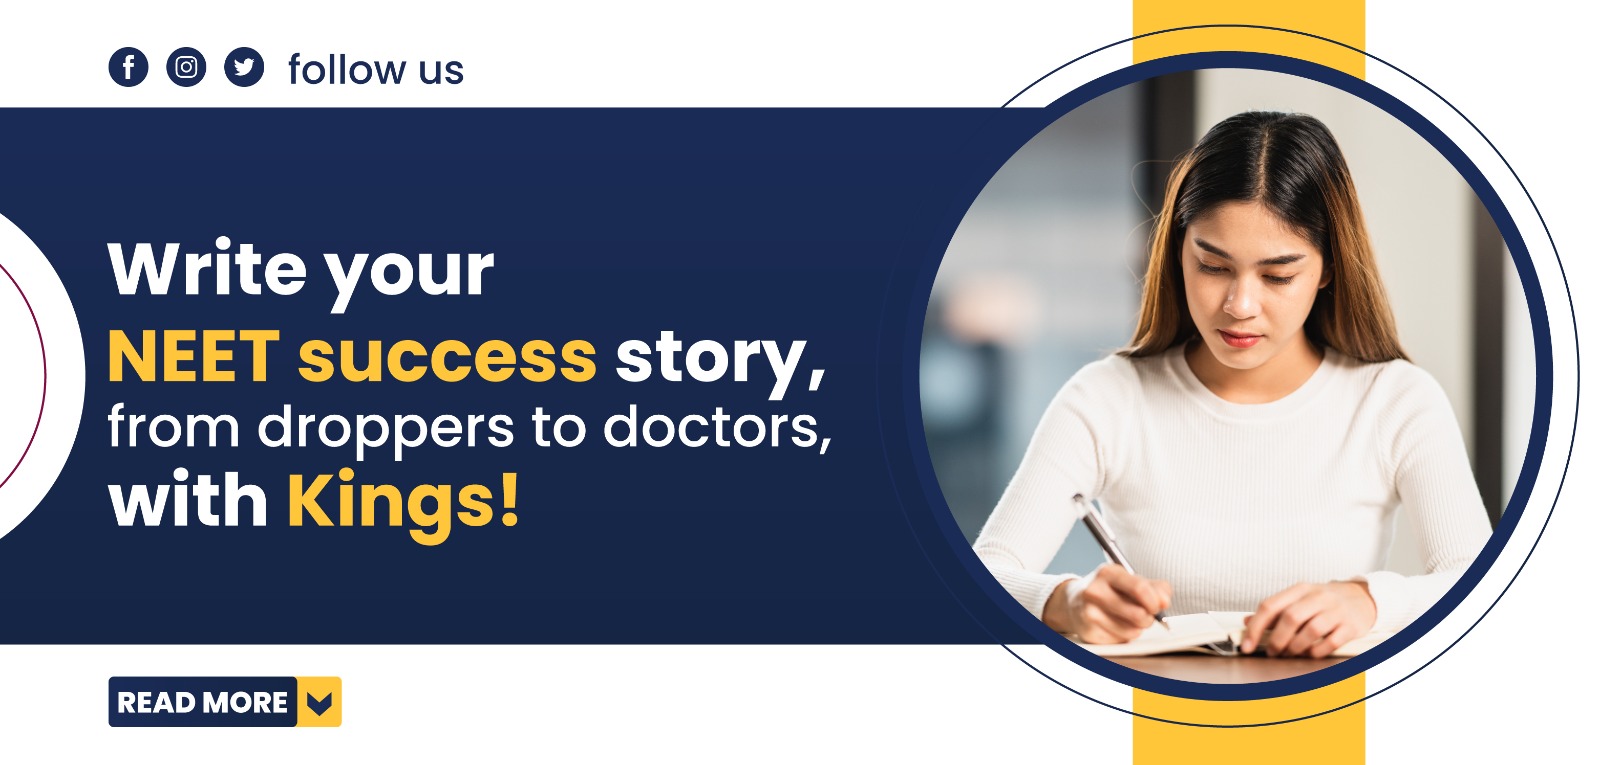 Write your NEET success story, from droppers to doctors, with Kings!